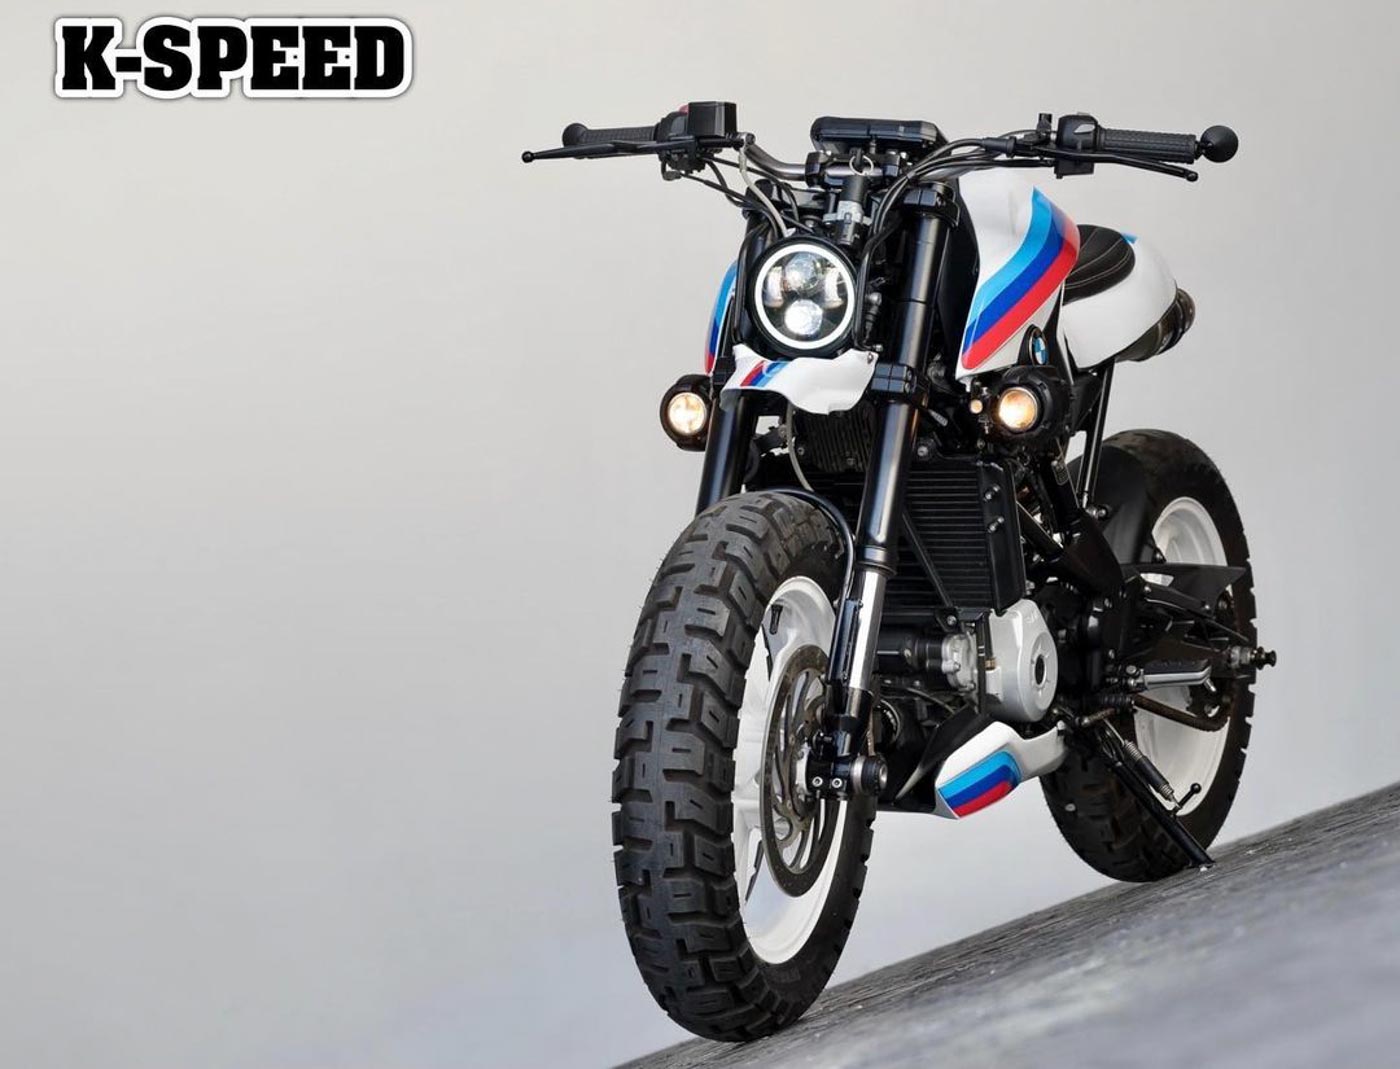 Modified Bmw G 310 R From K-Speed Customs Is Gothic